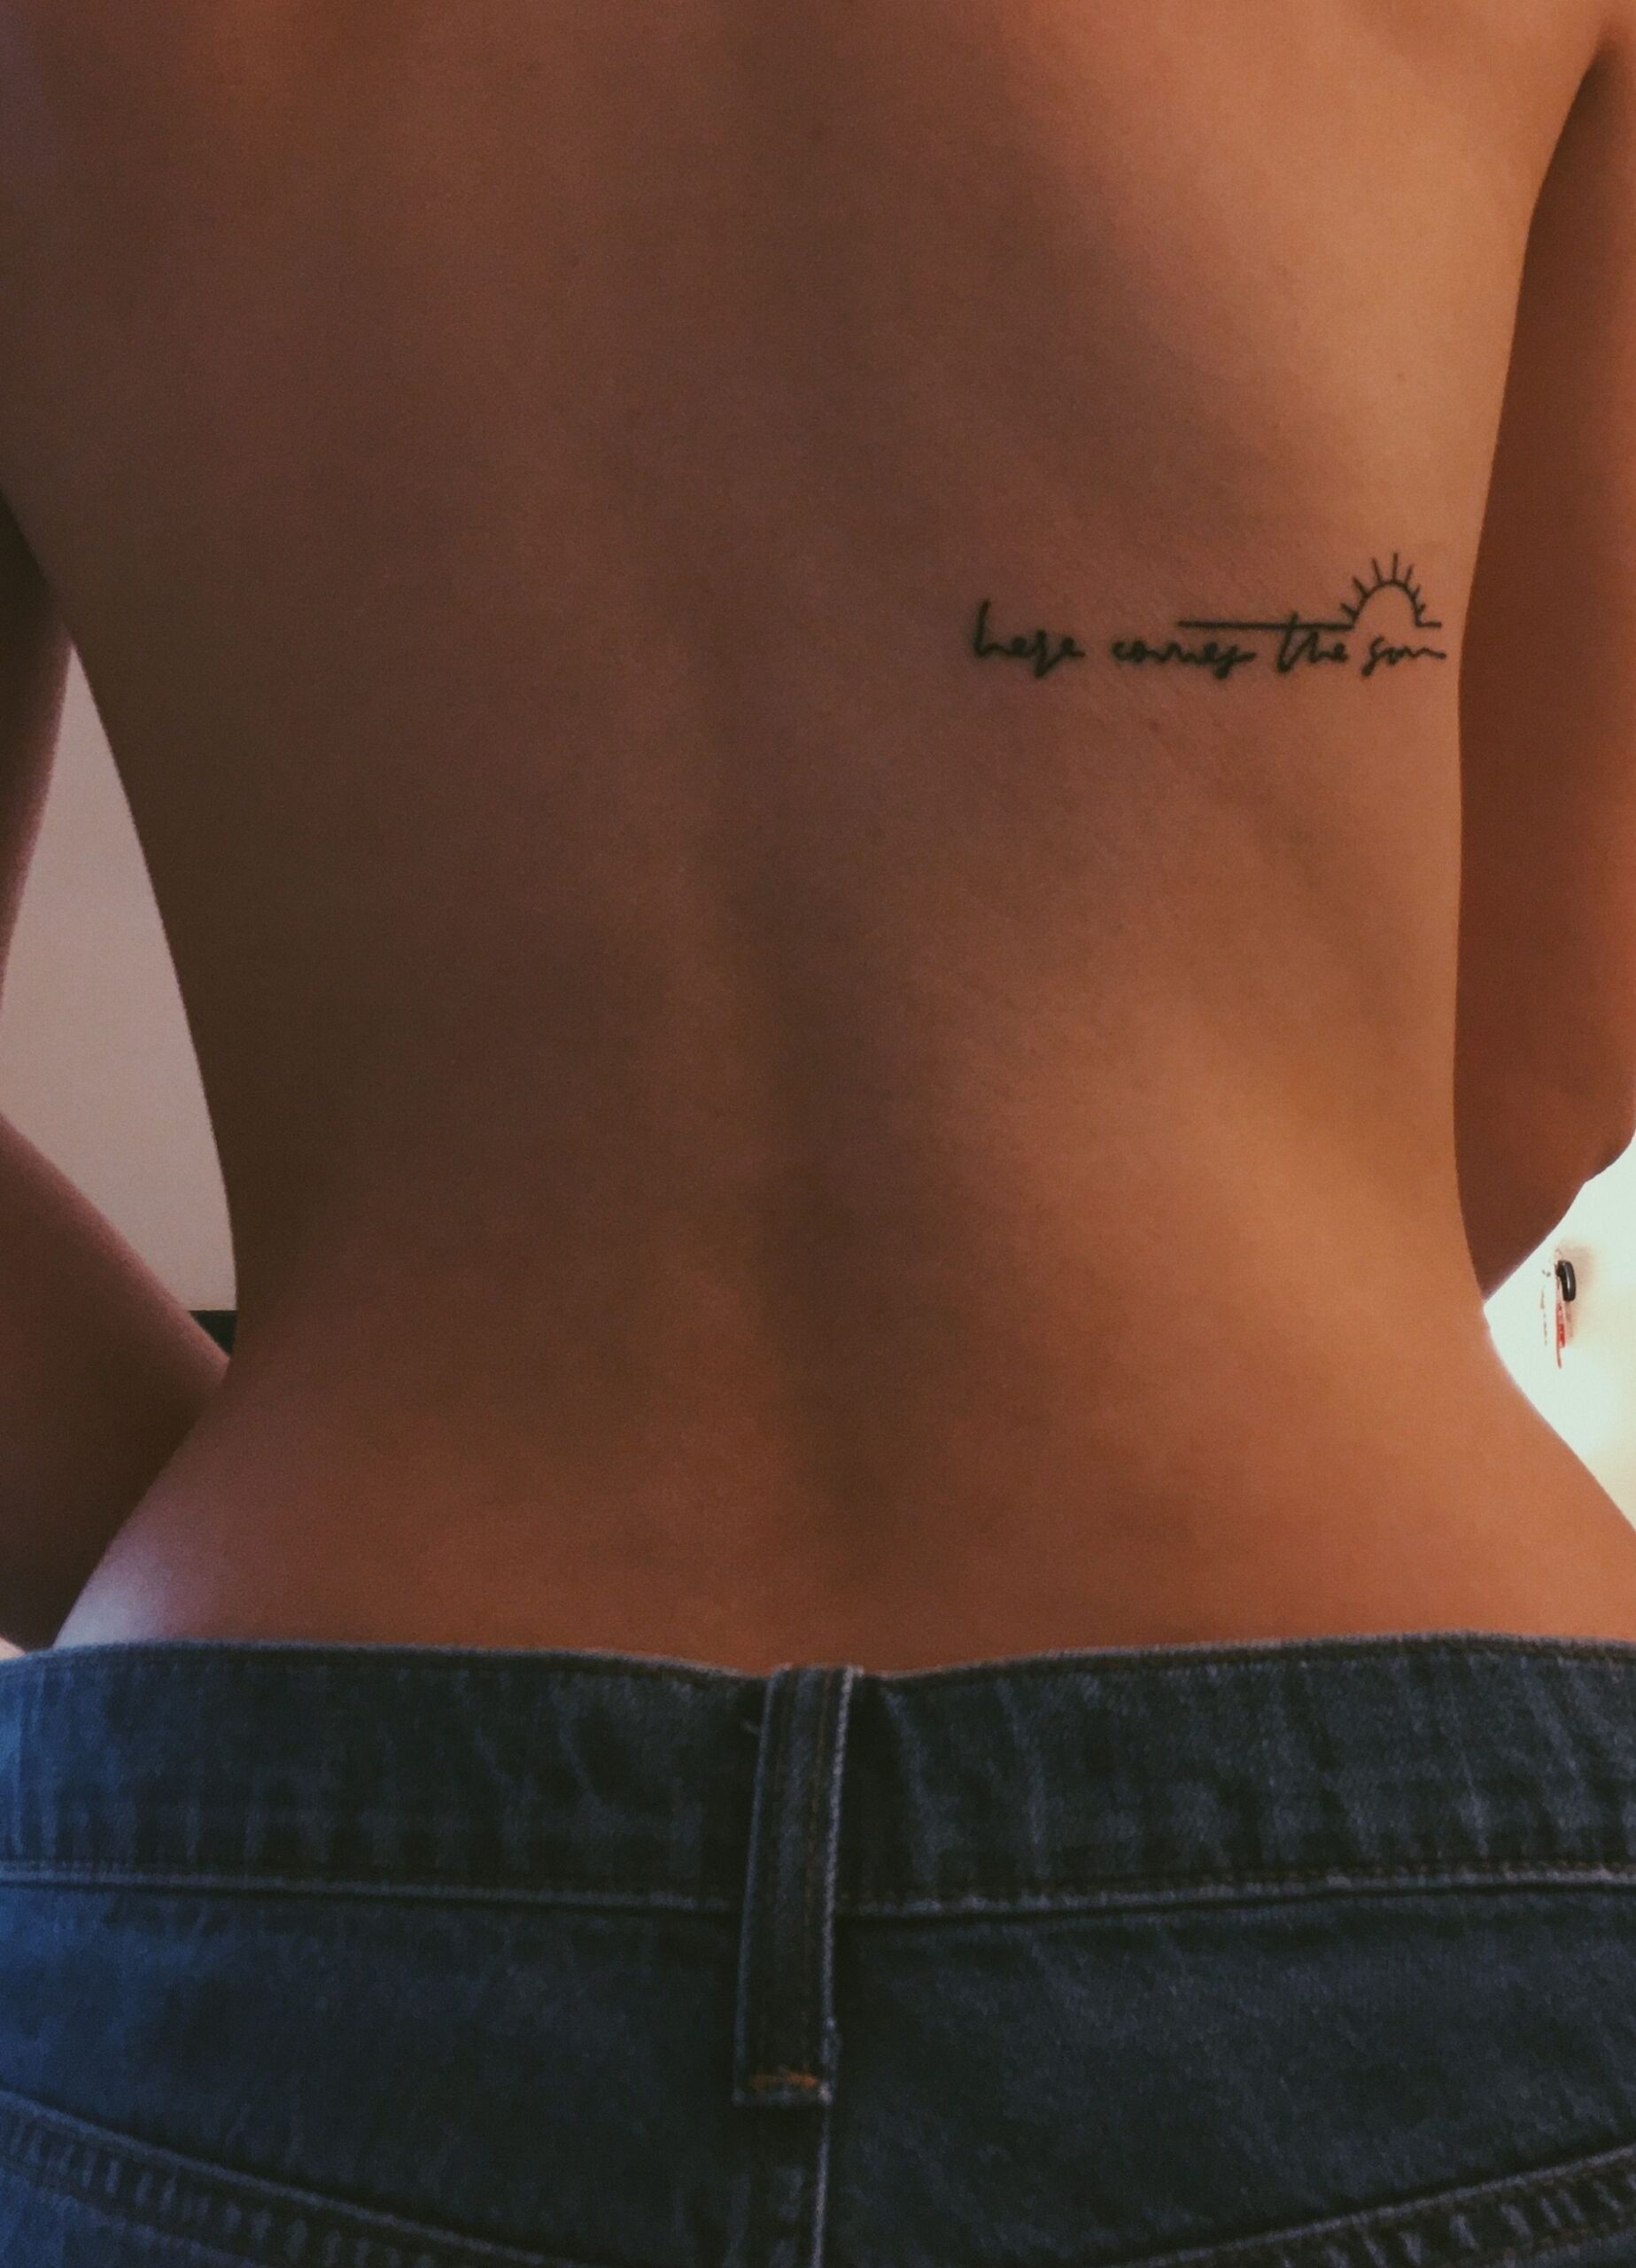 Here comes the sun tattoo #simpletattoos #herecomesthesun #thebeatles #smalltattoos #backtattoo...